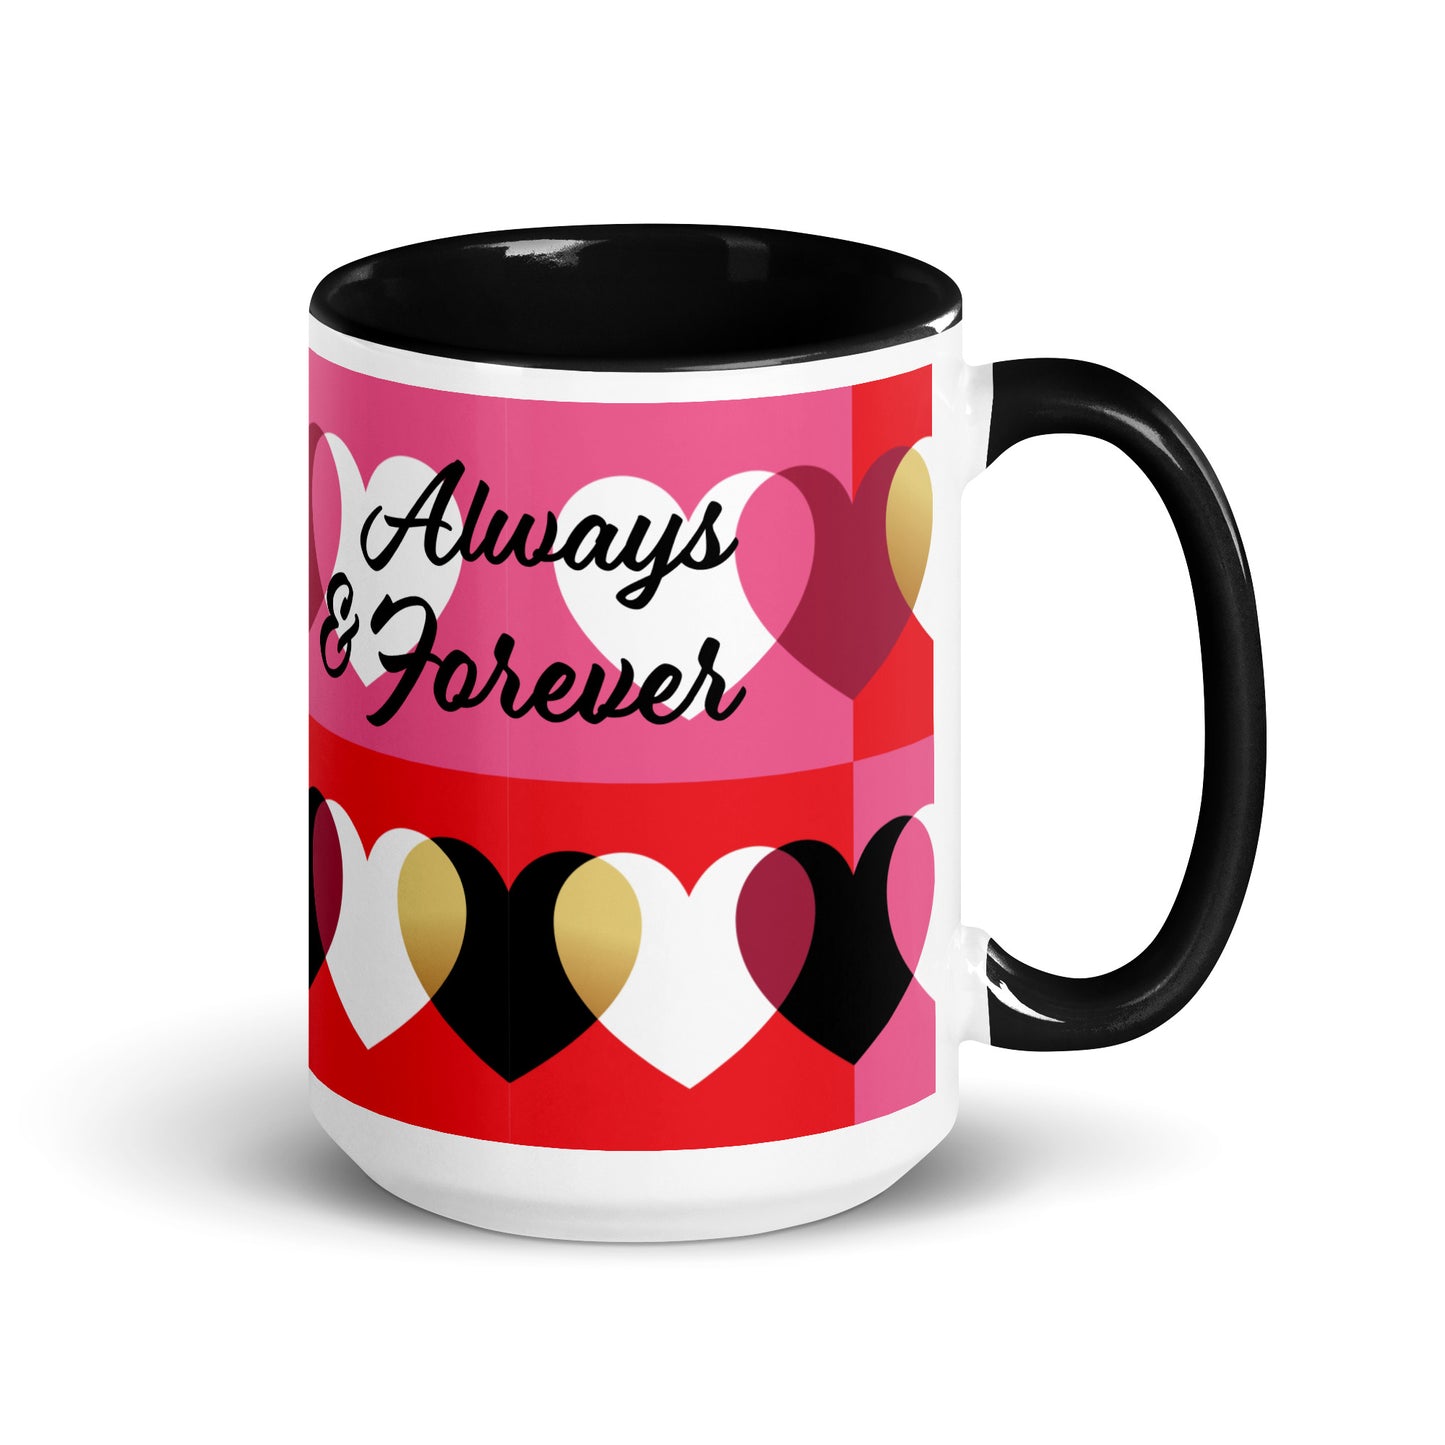 Always & Forever mug with hearts, black, red